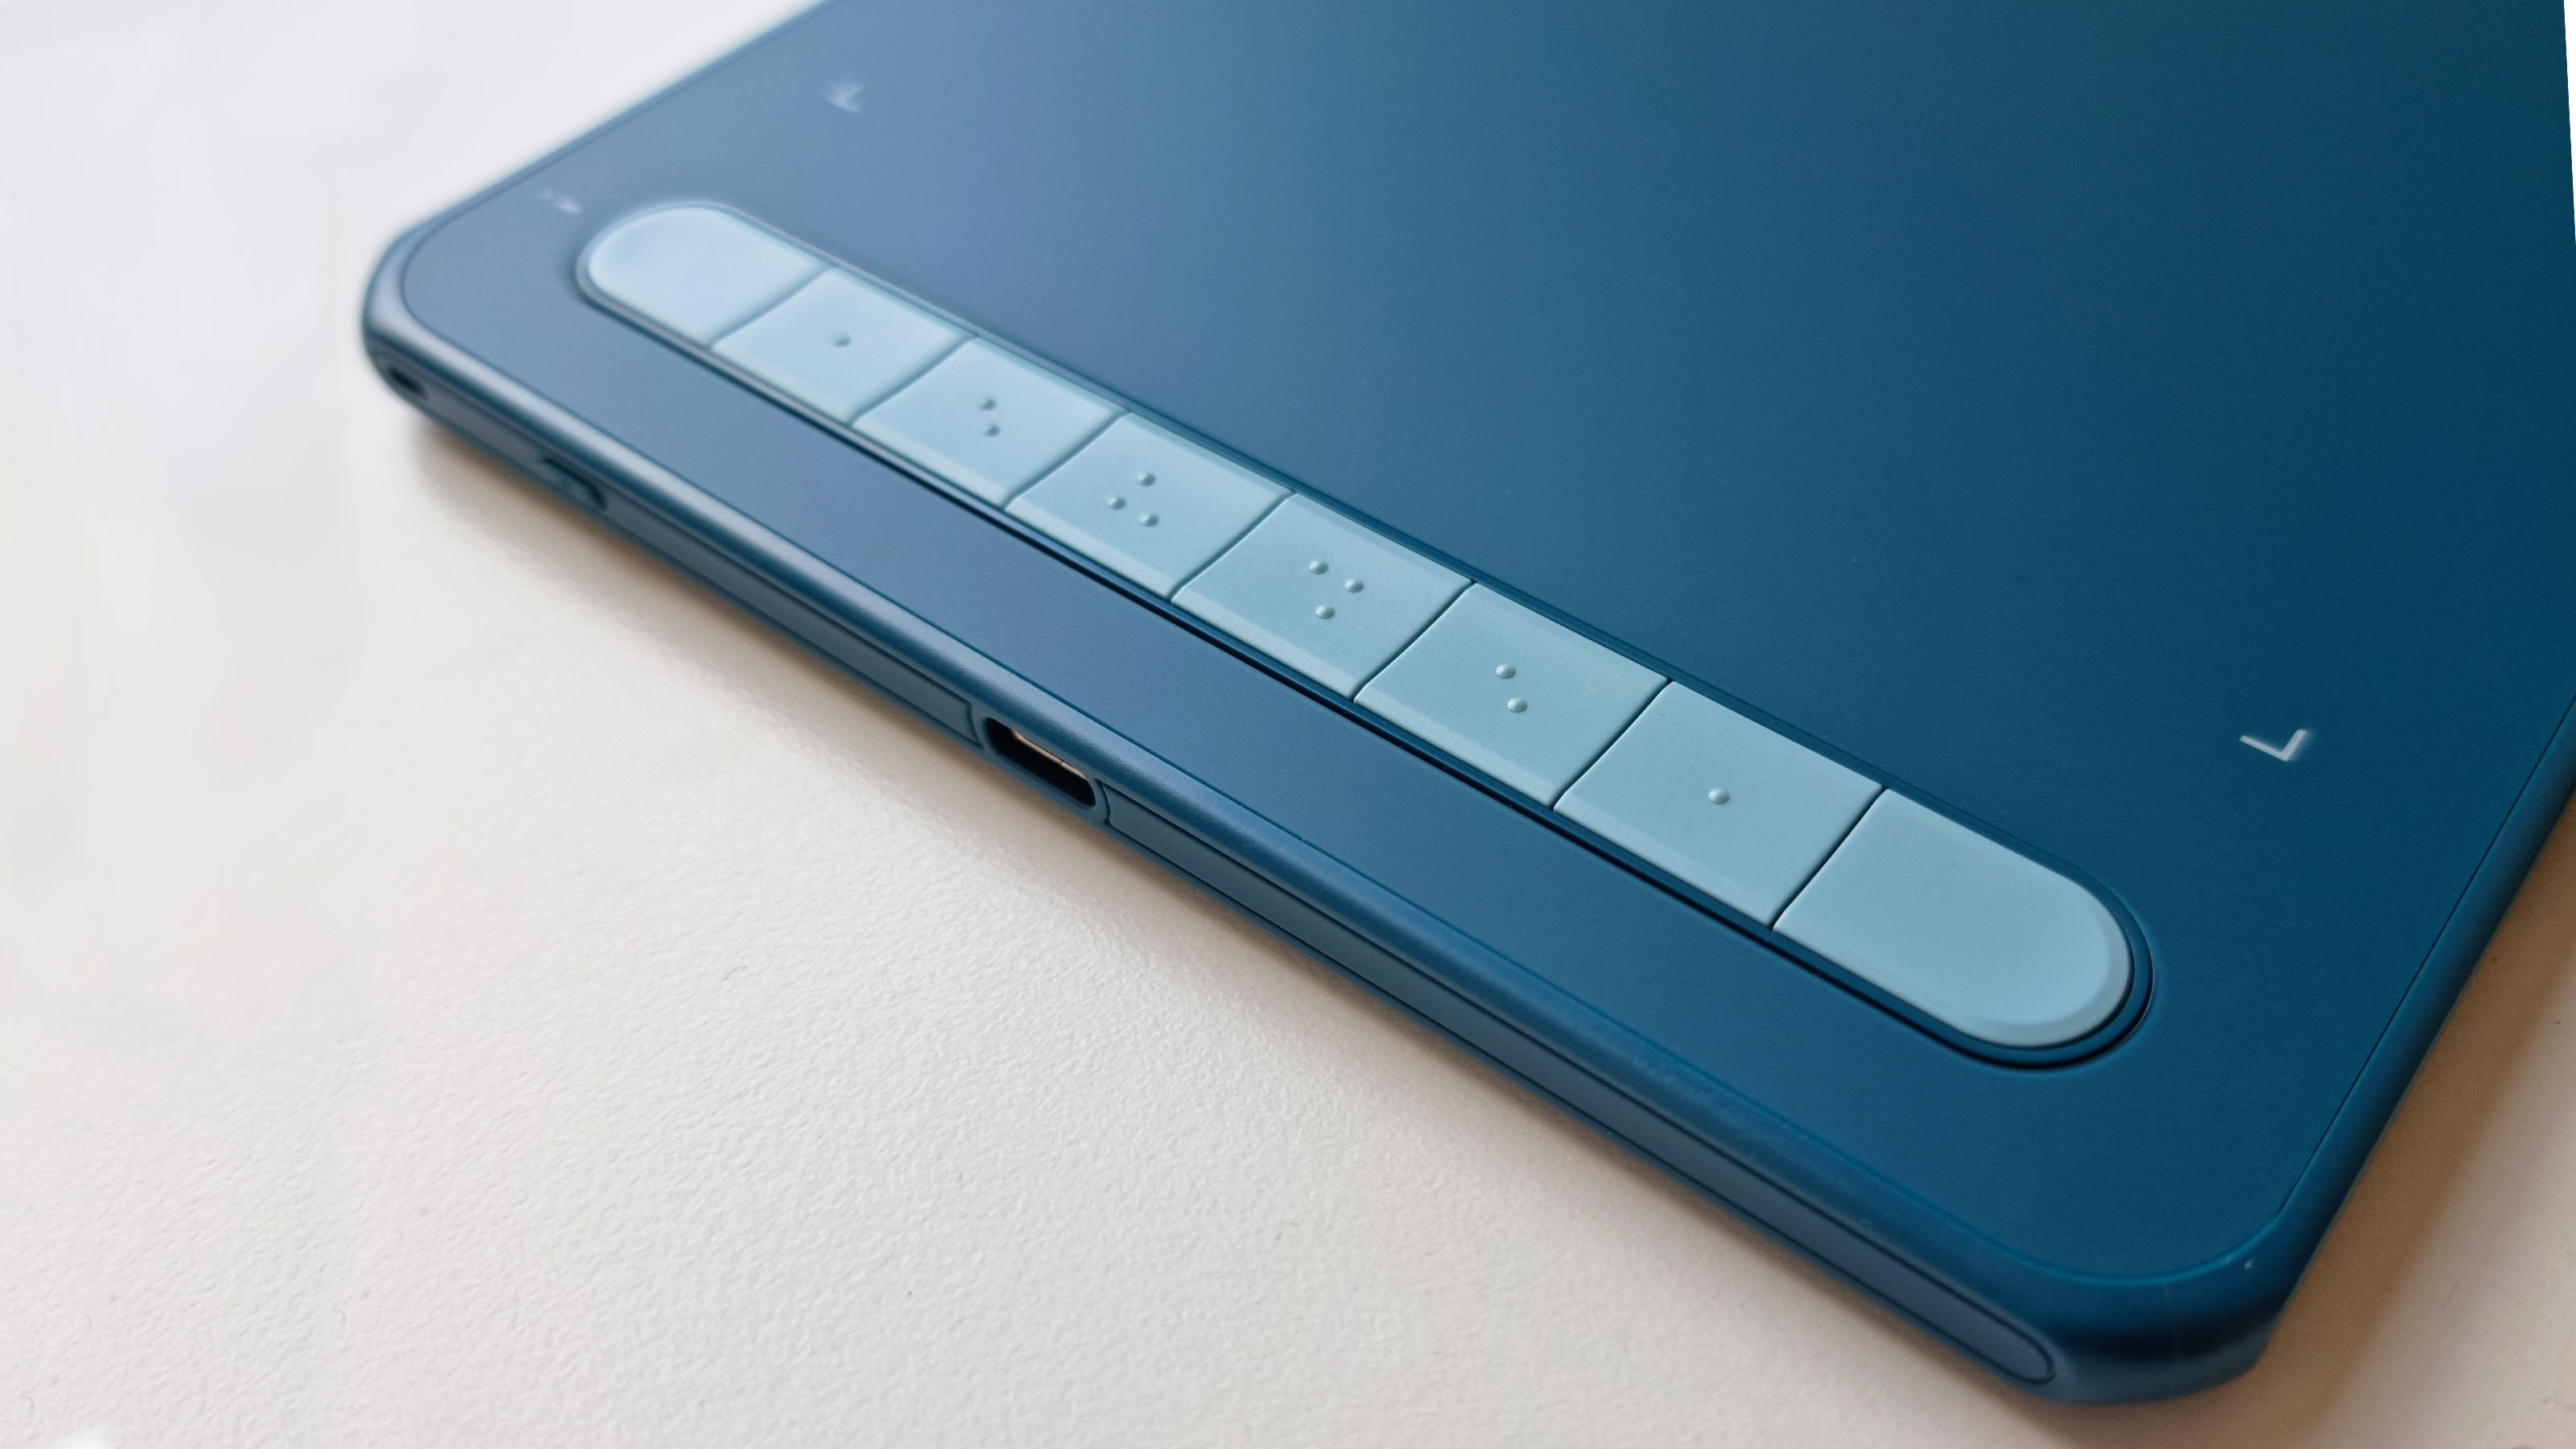 Image of the 8 hotkeys on the XP-Pen Deco MW tablet